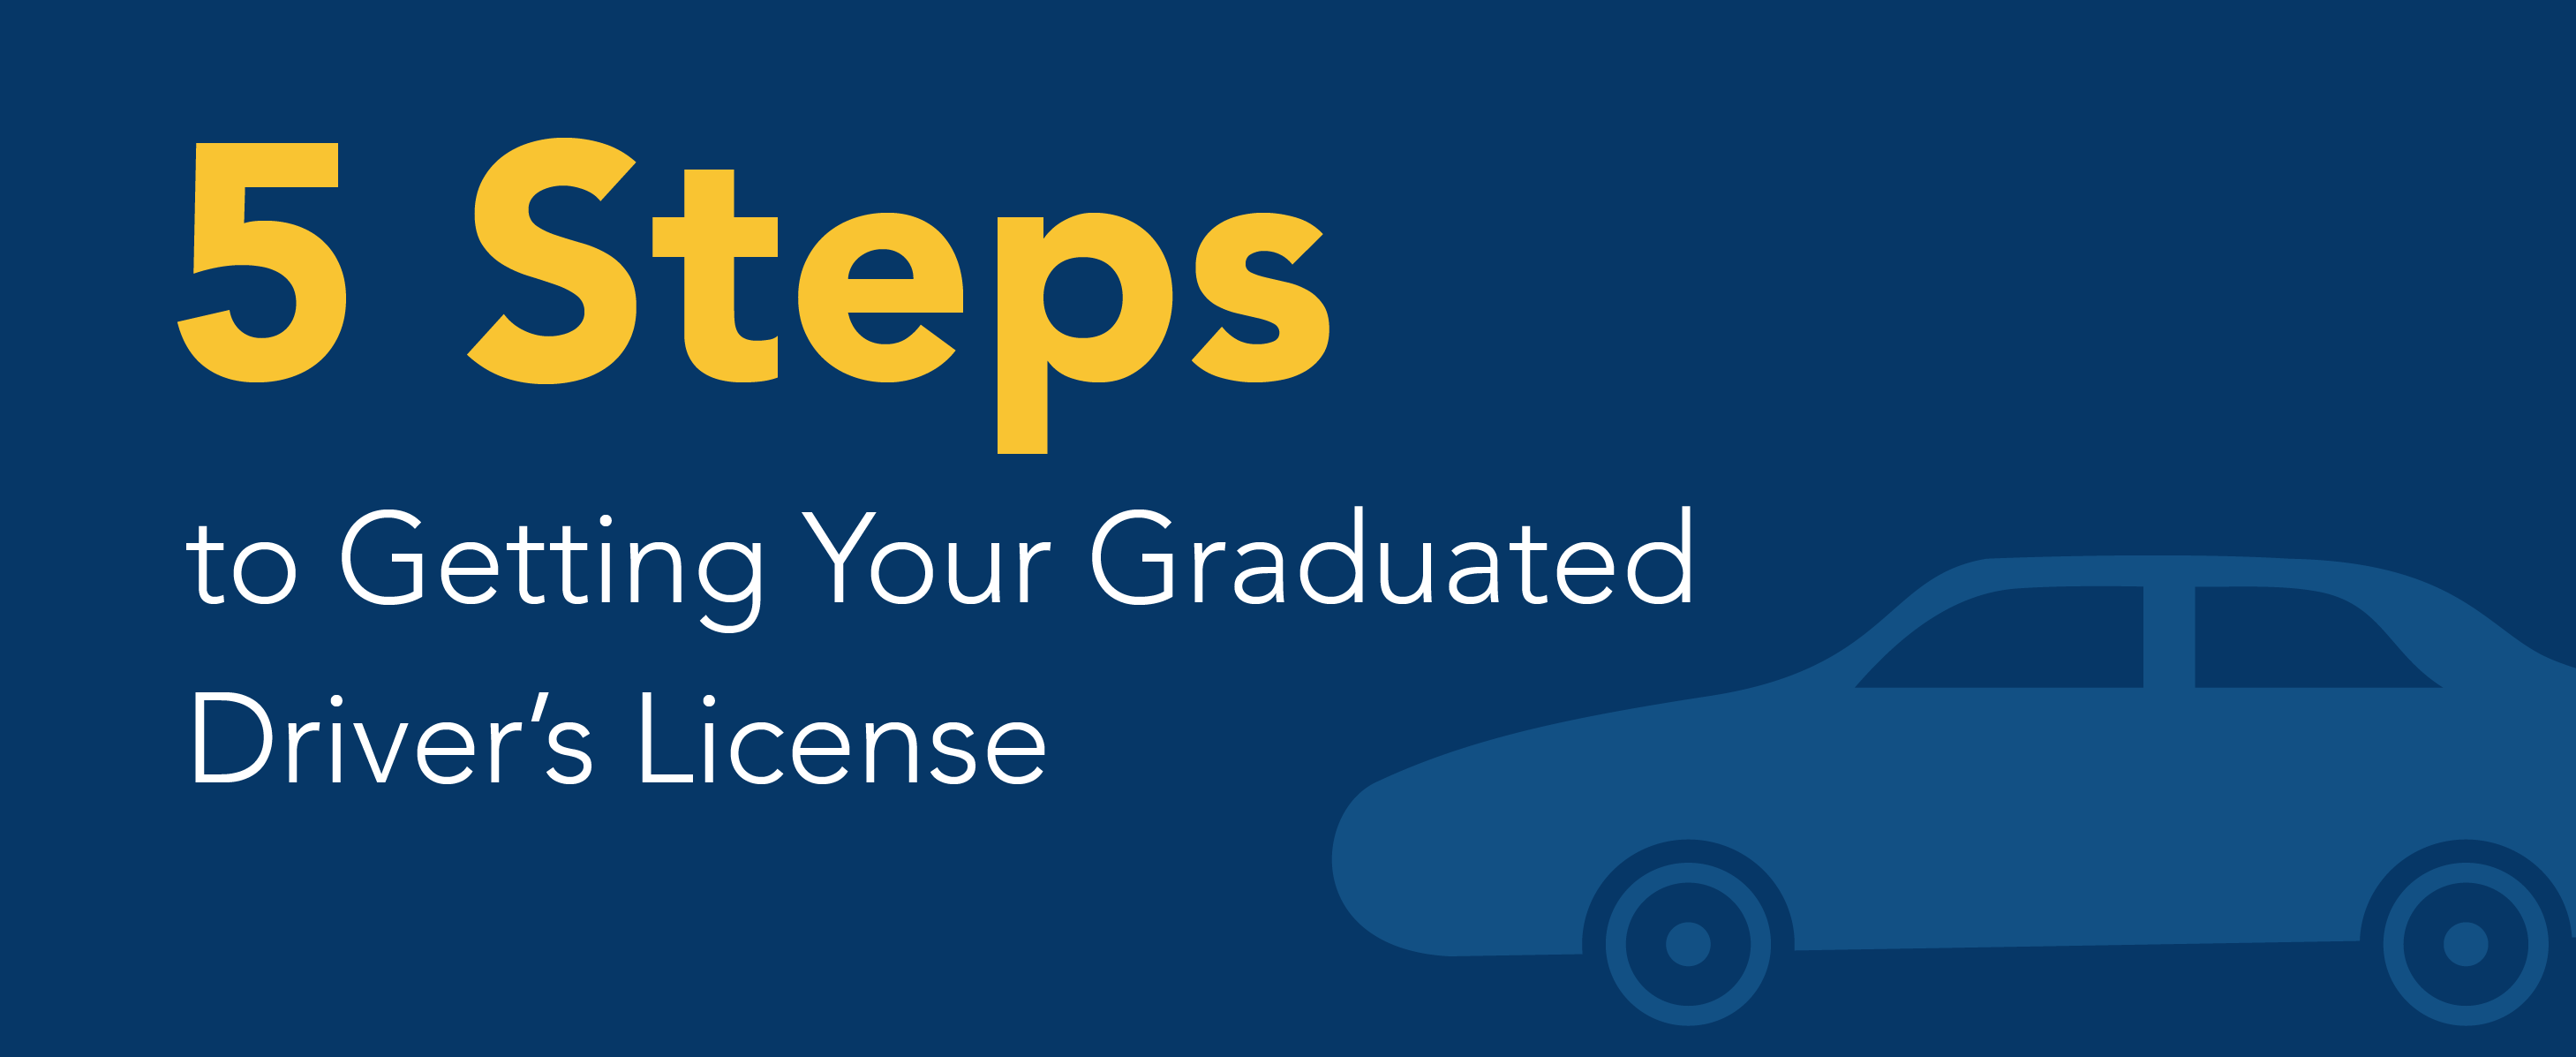 5 Steps to Getting Your Graduated Driver's License *image of car*